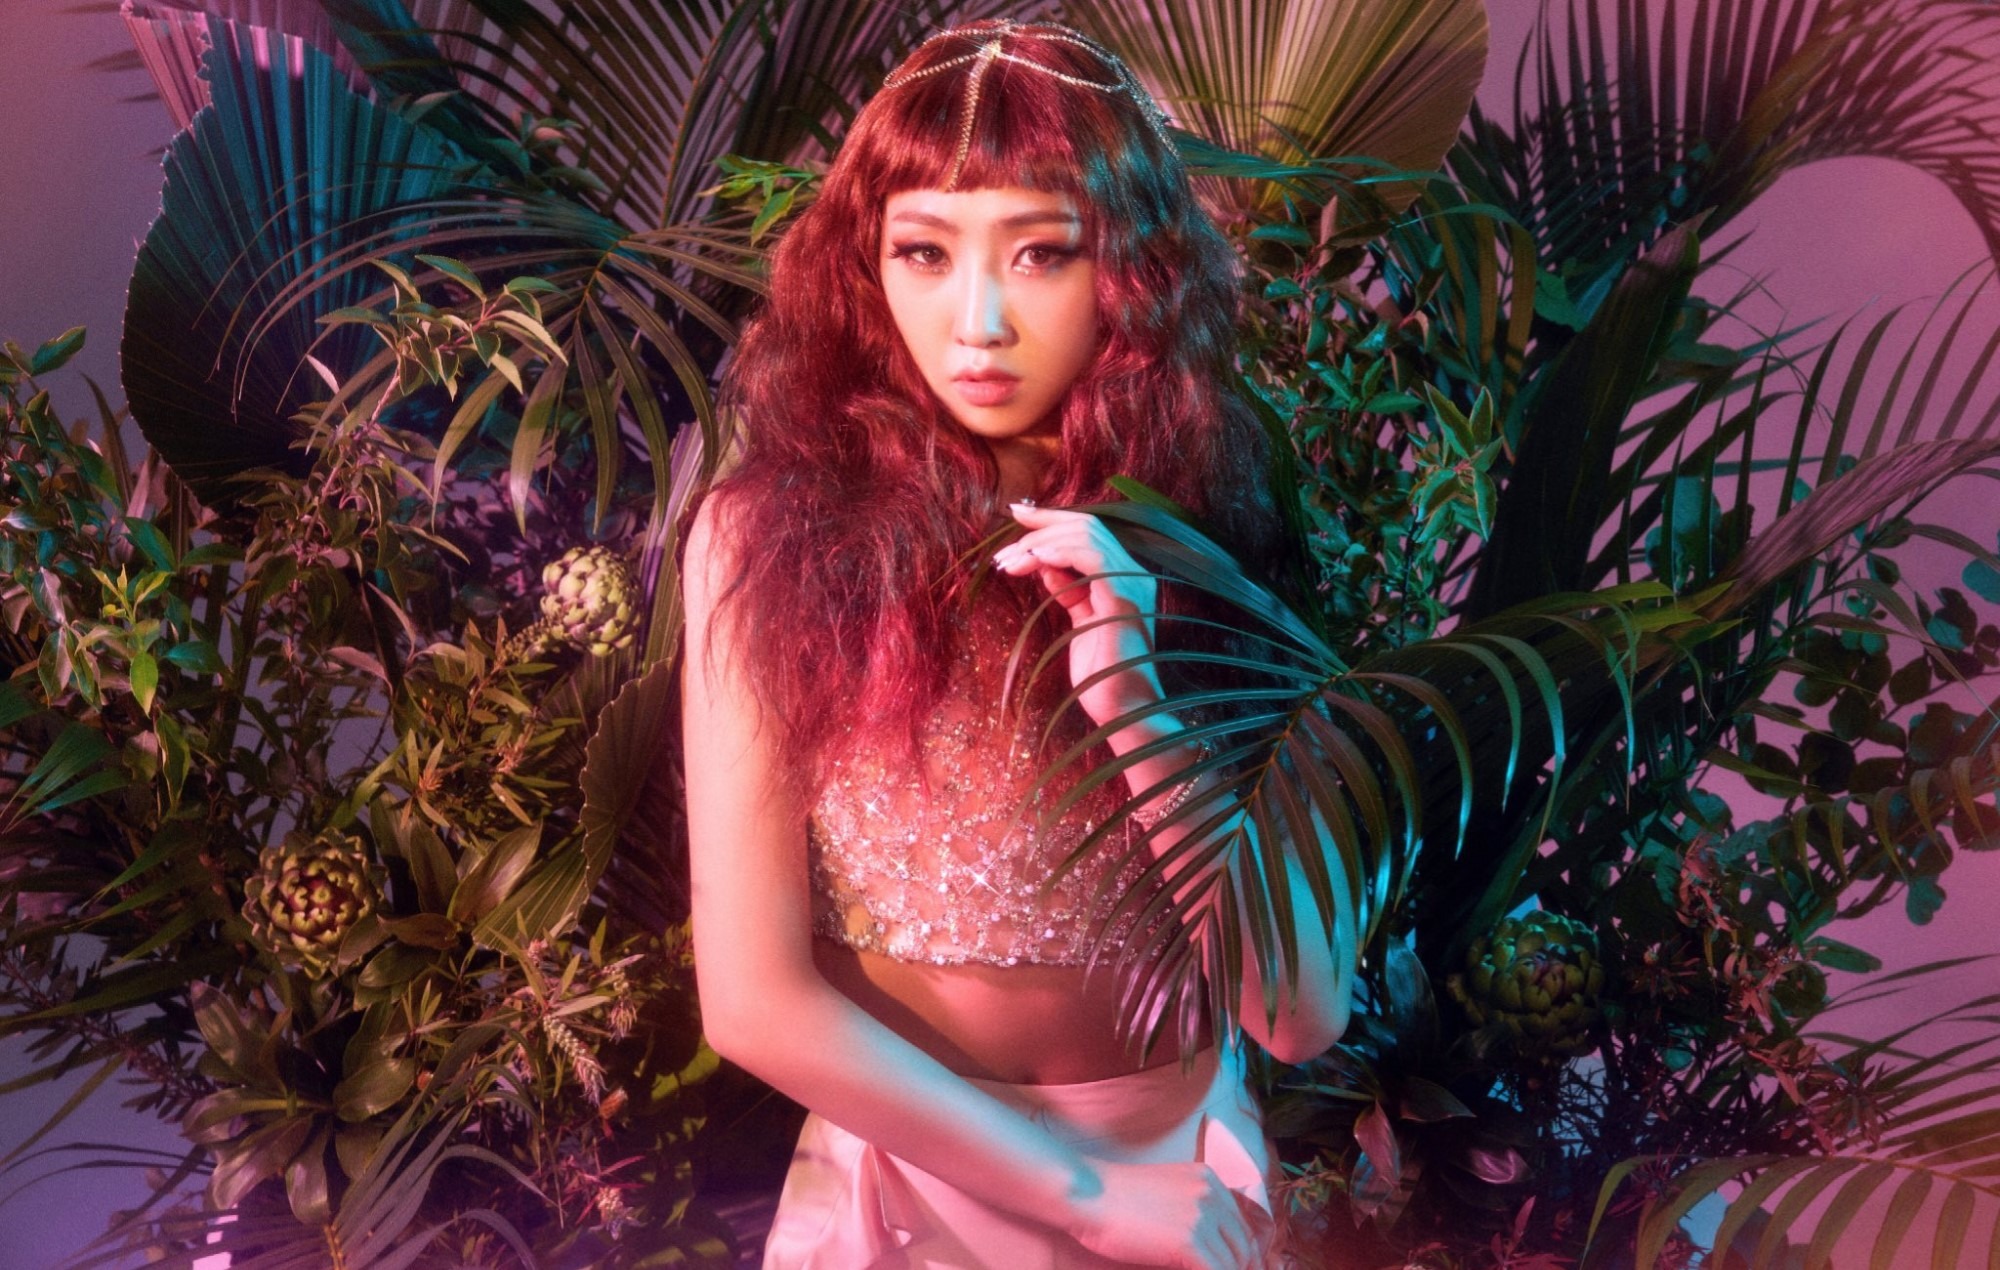 Minzy speaks about her new single ‘Teamo’, how she has changed over her career and why she started her own label